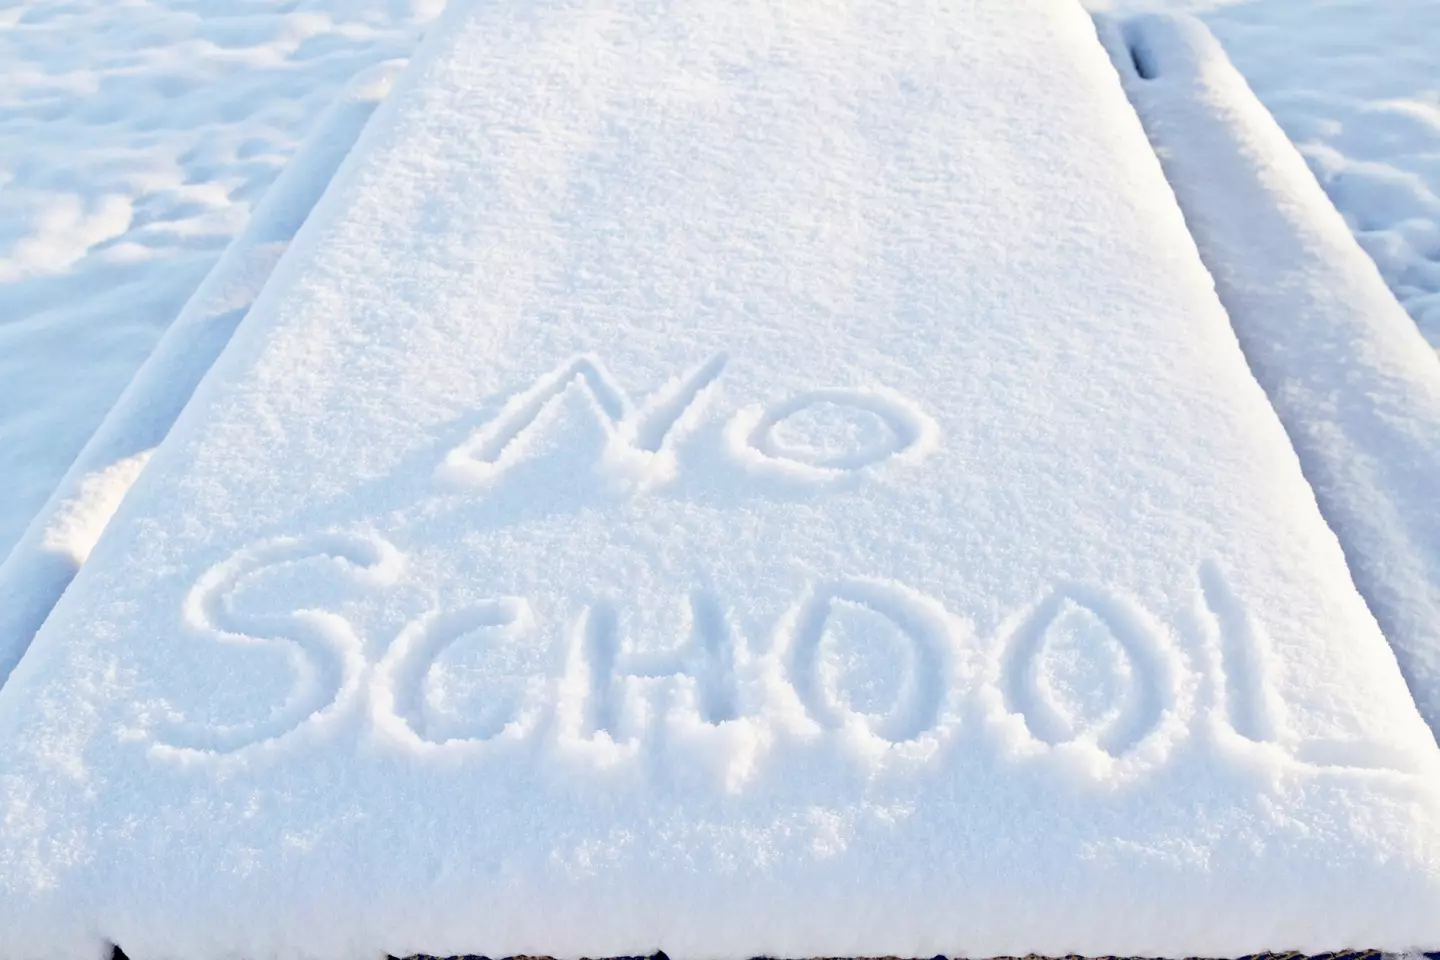 If it's too cold some schools could be closed, even though there's no law saying they have to shut their doors.